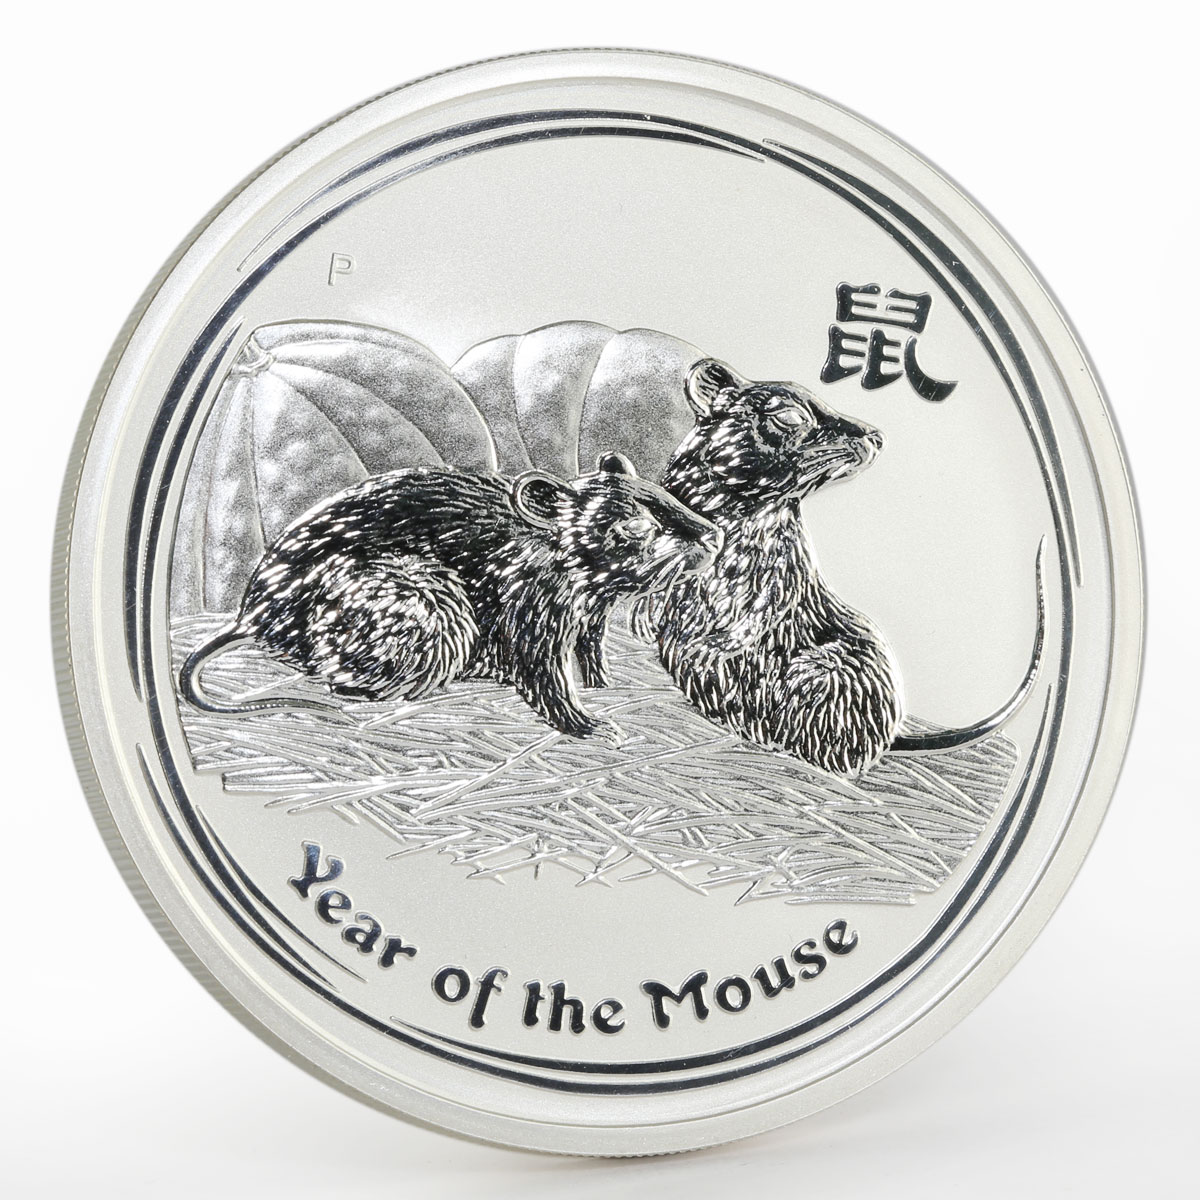 Australia 8 Dollars Year of the Mouse Lunar Series II 5 oz silver coin 2008